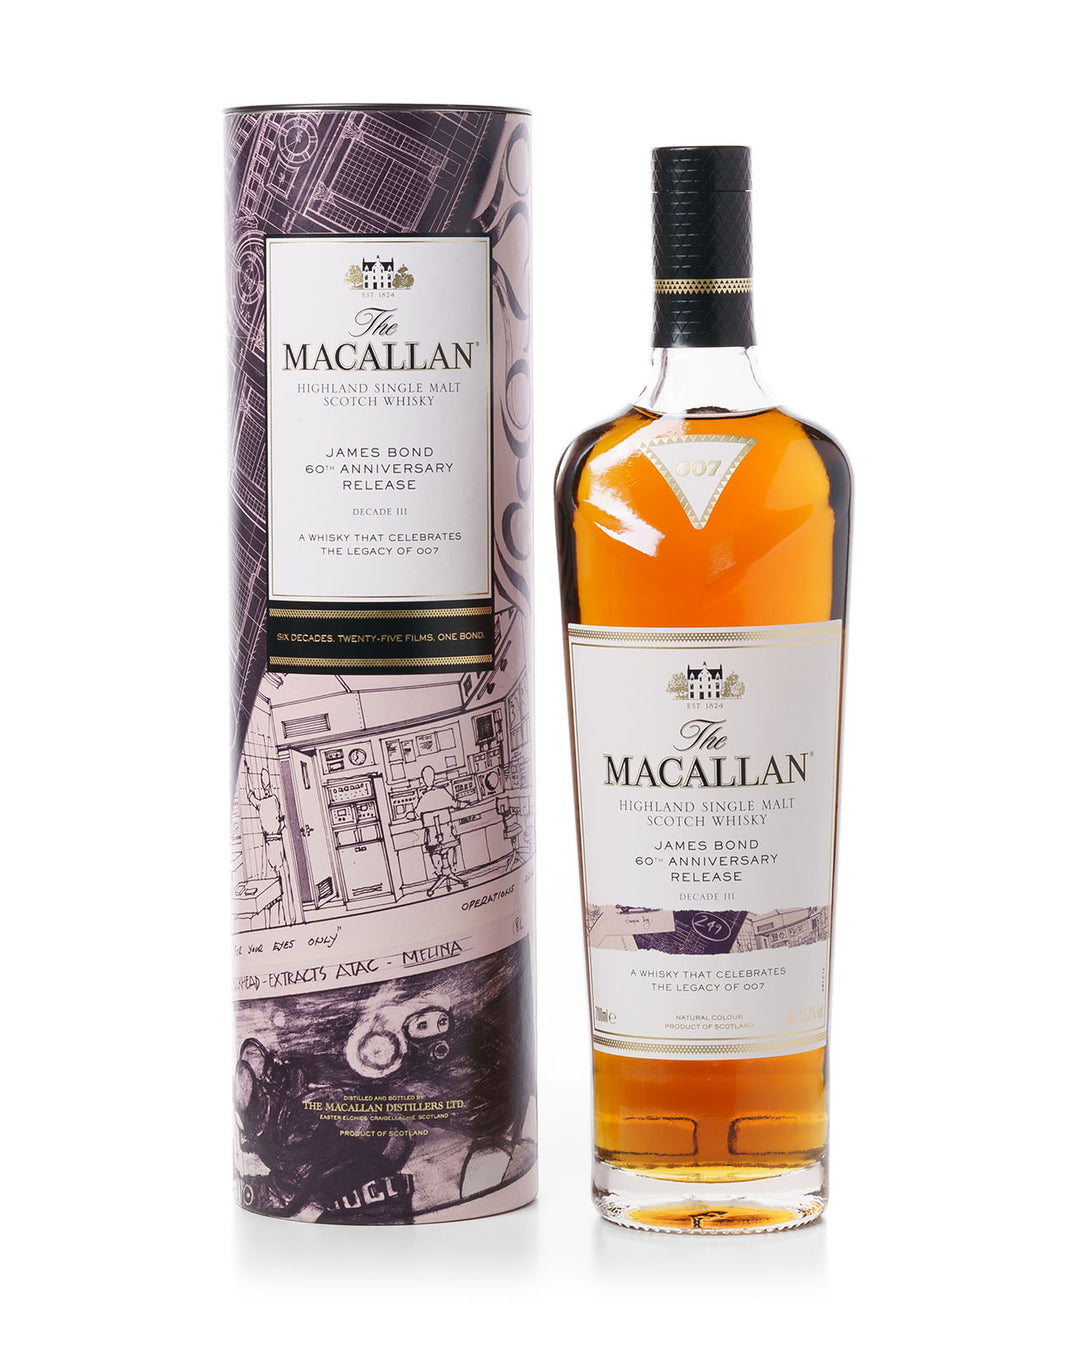 Macallan James Bond 60th Anniversary Release Decade III Bottled 2022 With Original Tube